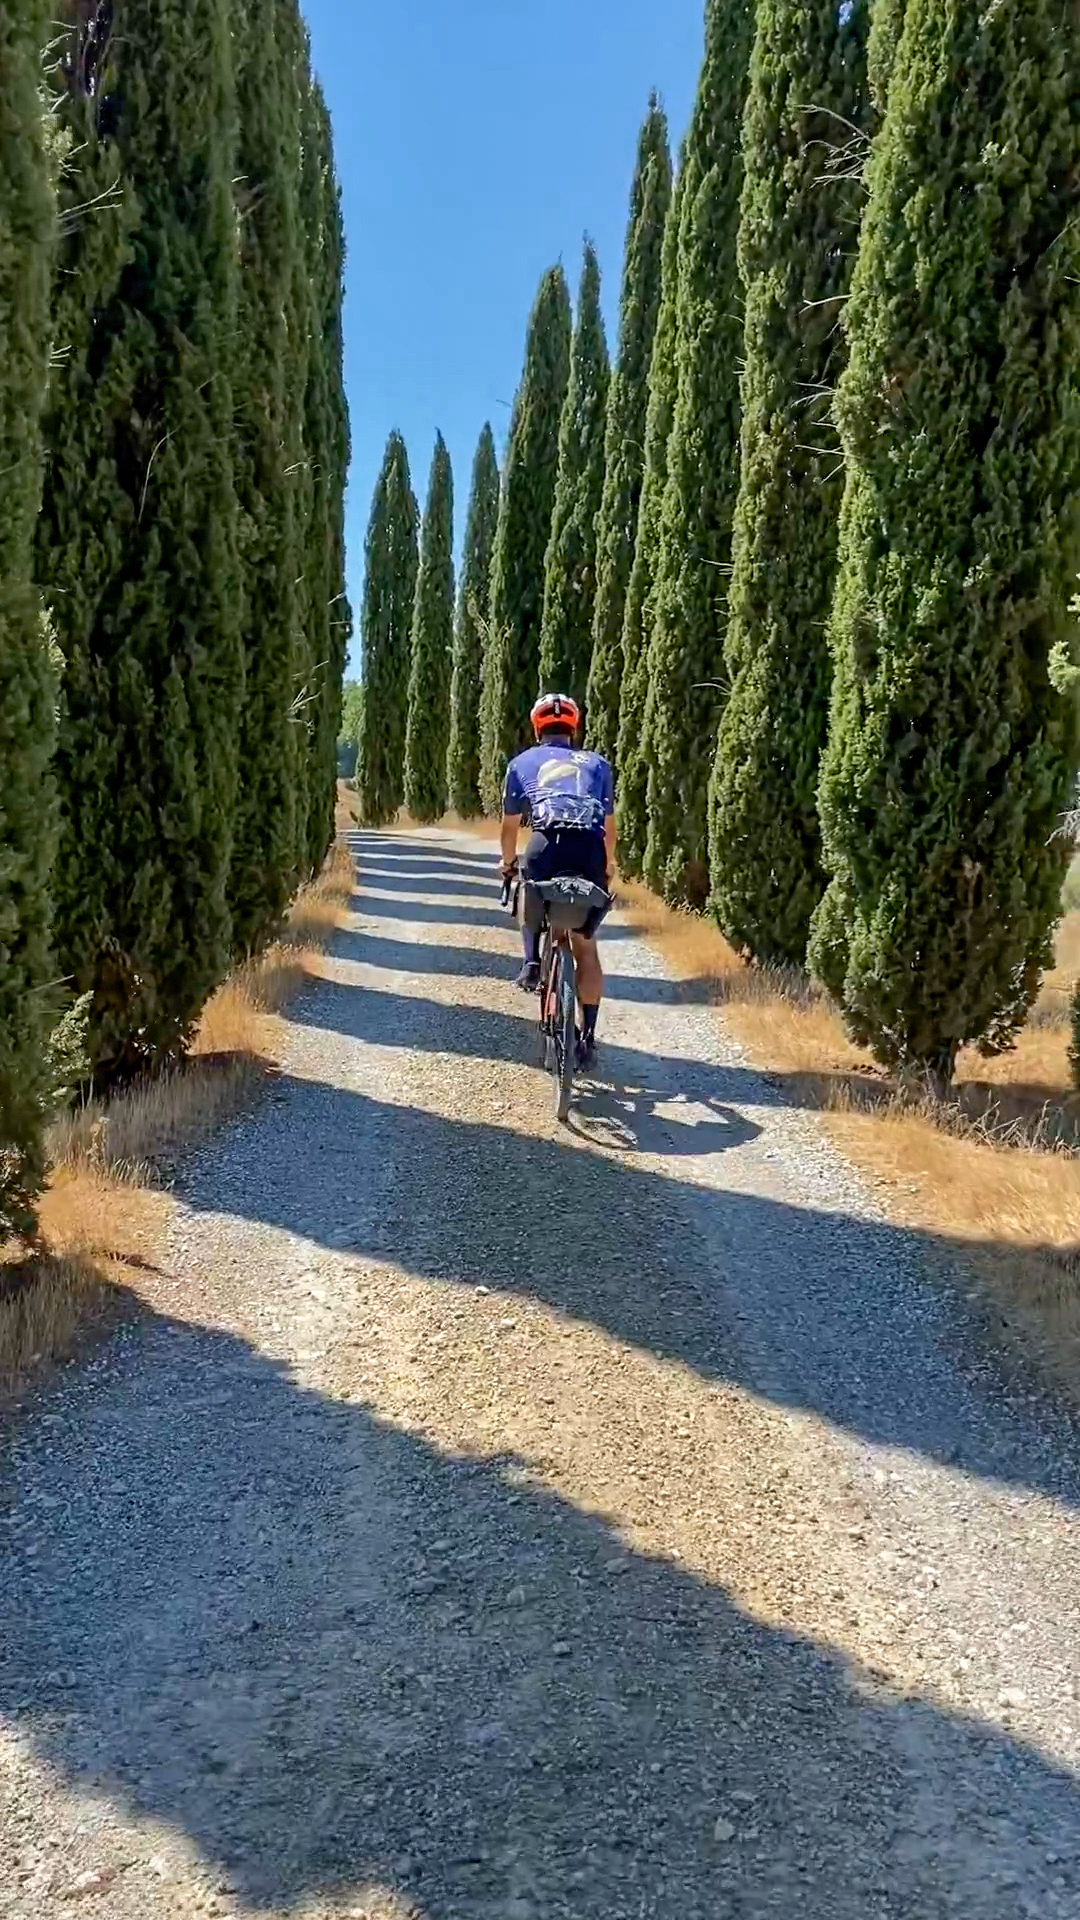 Classic road with cypresses on either side